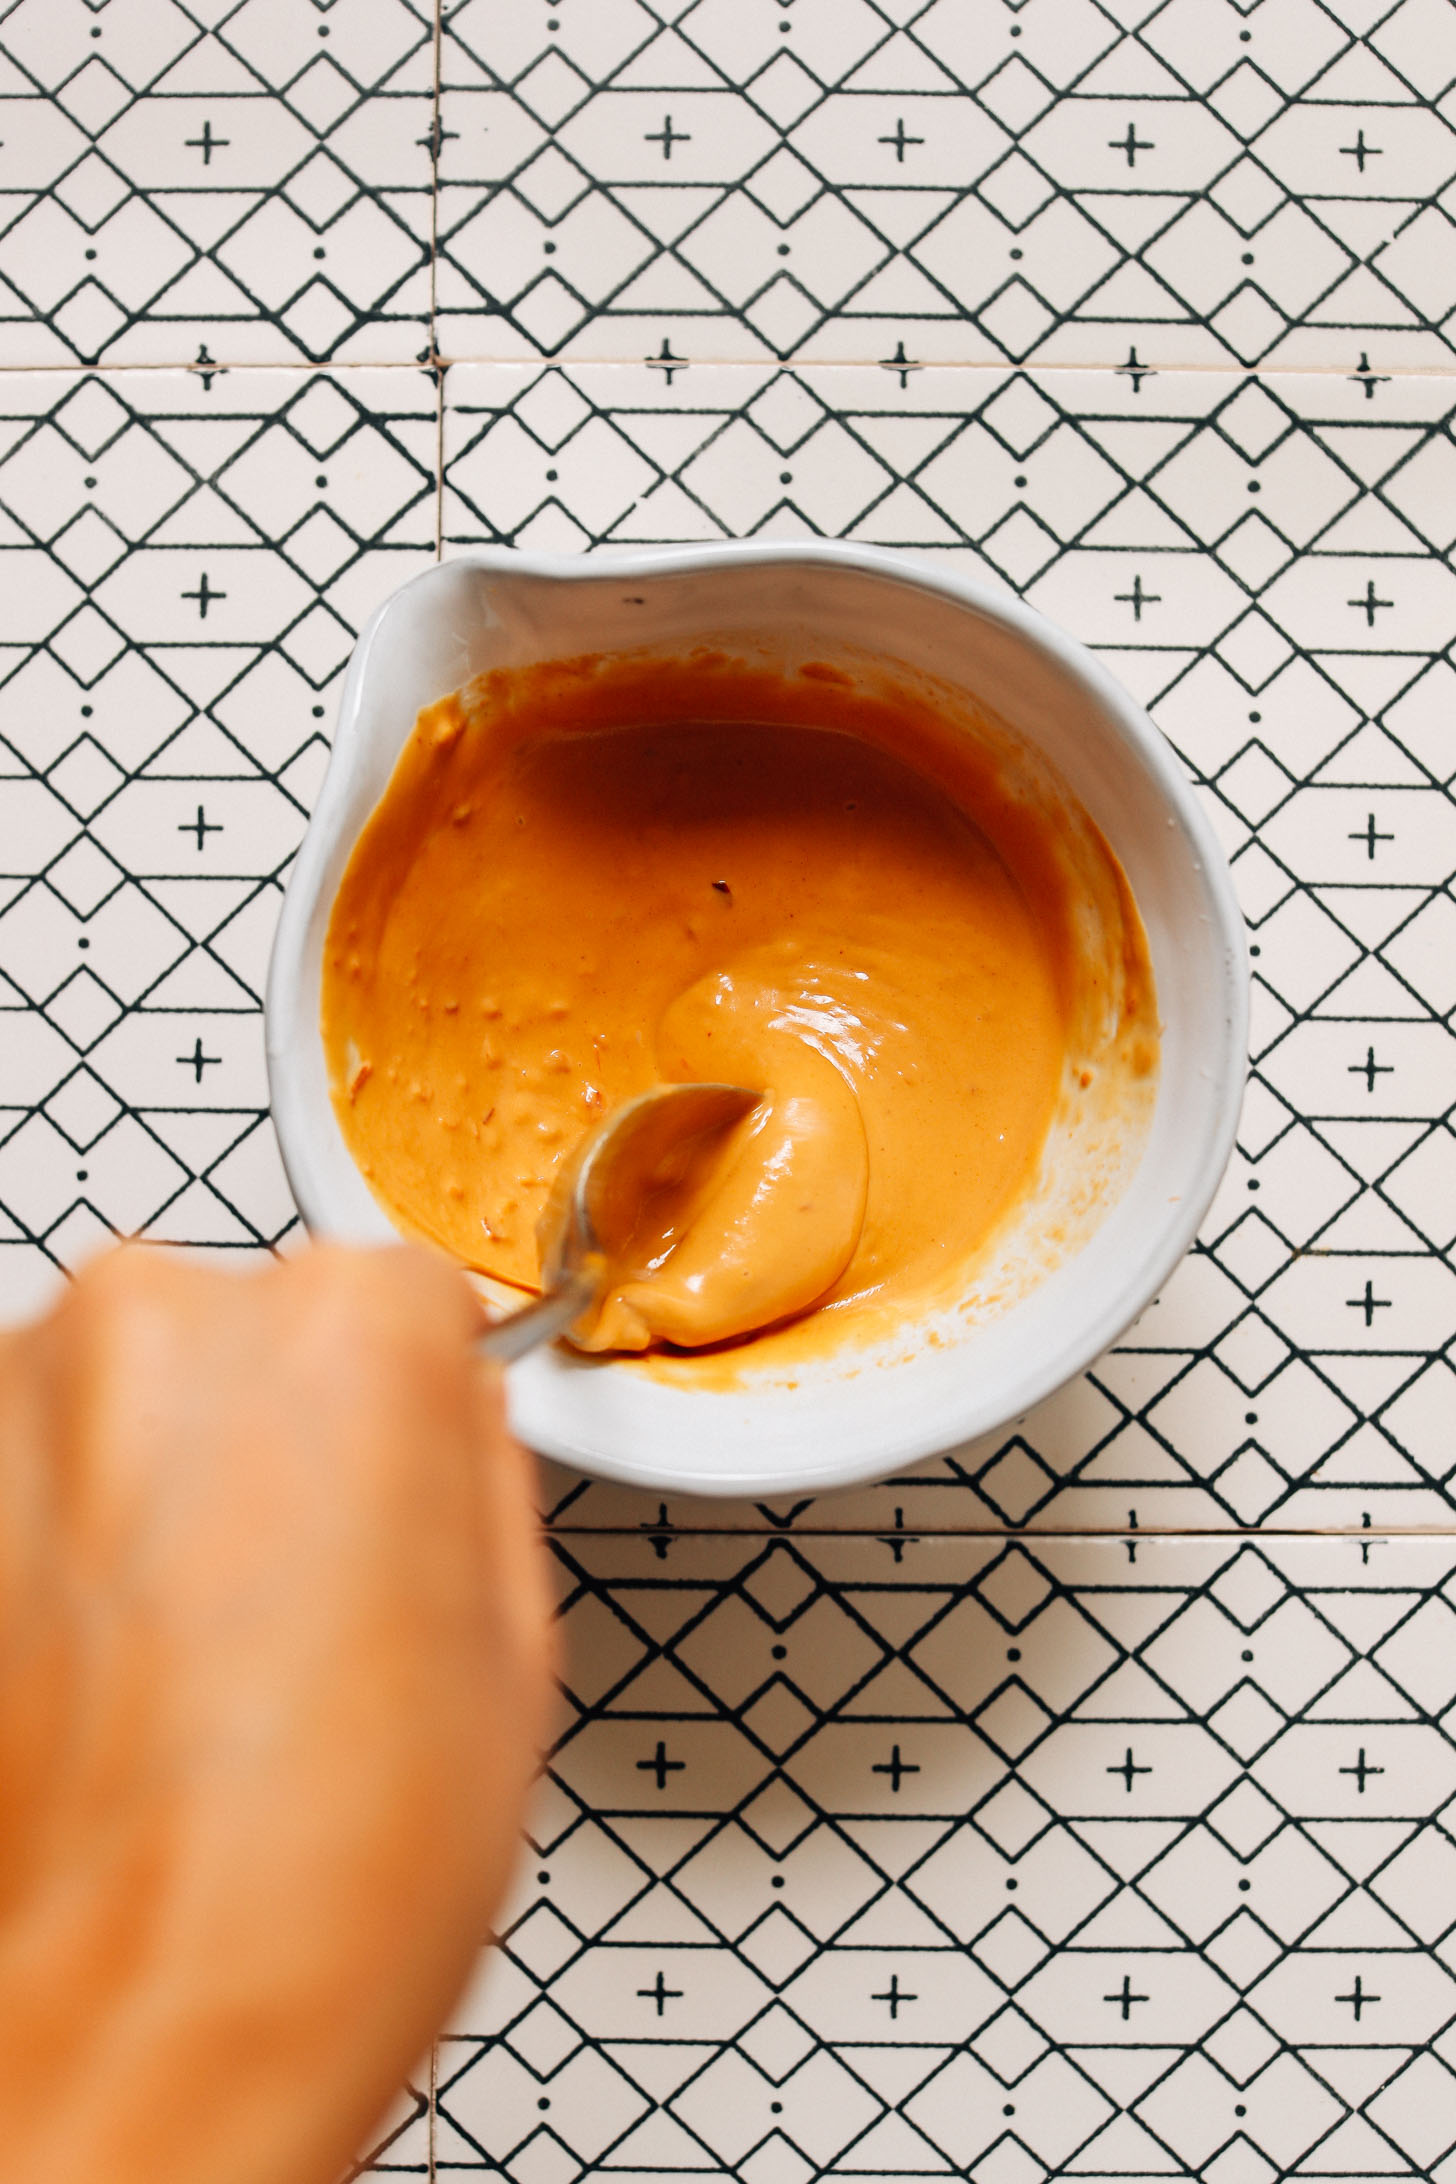 Using a spoon to stir a bowl of Spicy Peanut Sauce for topping Gado Gado